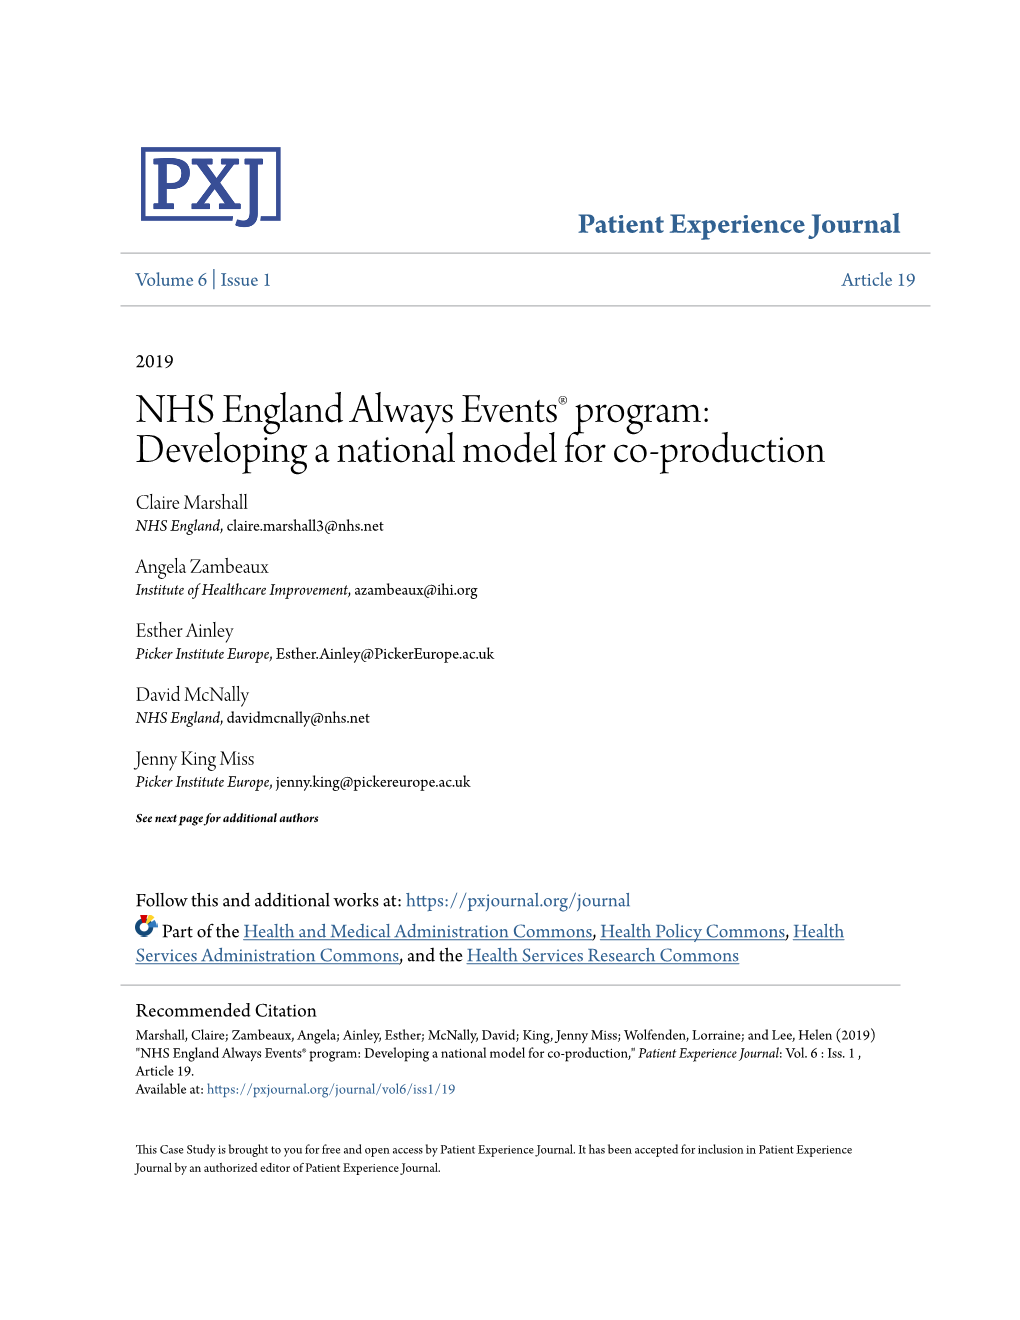 NHS England Always Events® Program: Developing a National Model for Co-Production Claire Marshall NHS England, Claire.Marshall3@Nhs.Net